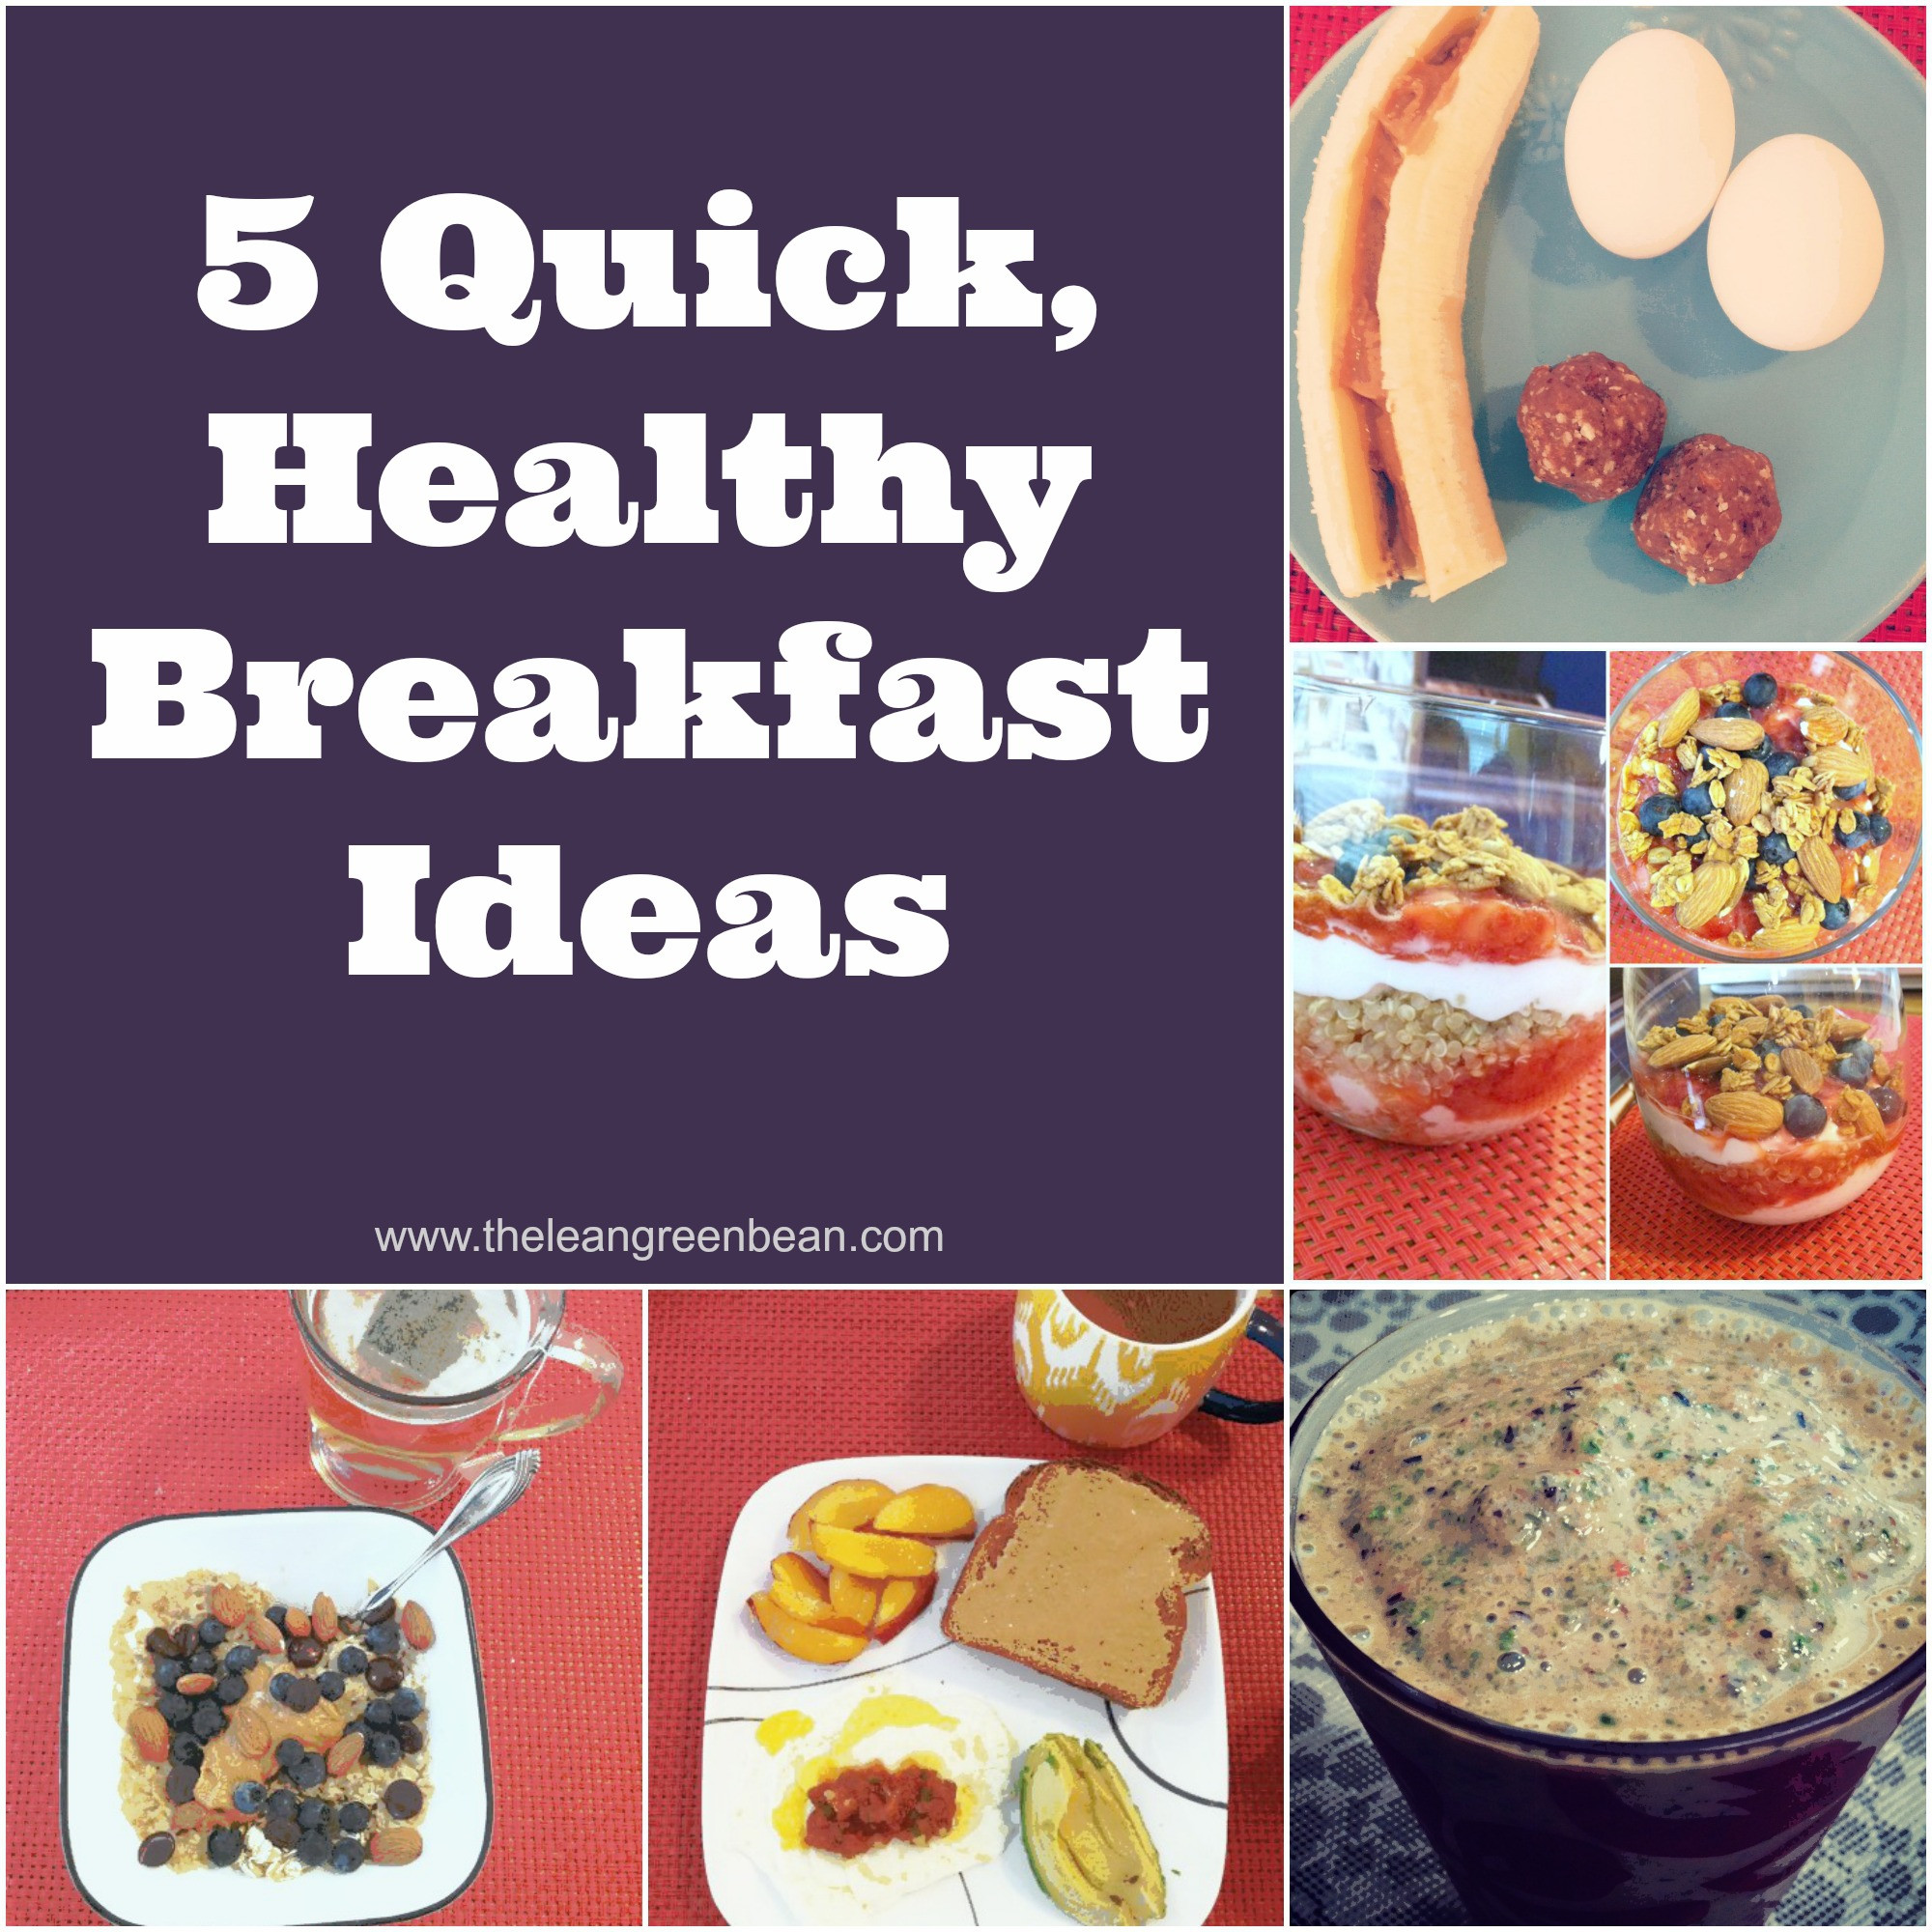 Quick Healthy Breakfast
 5 Quick Healthy Breakfast Ideas from a Registered Dietitian